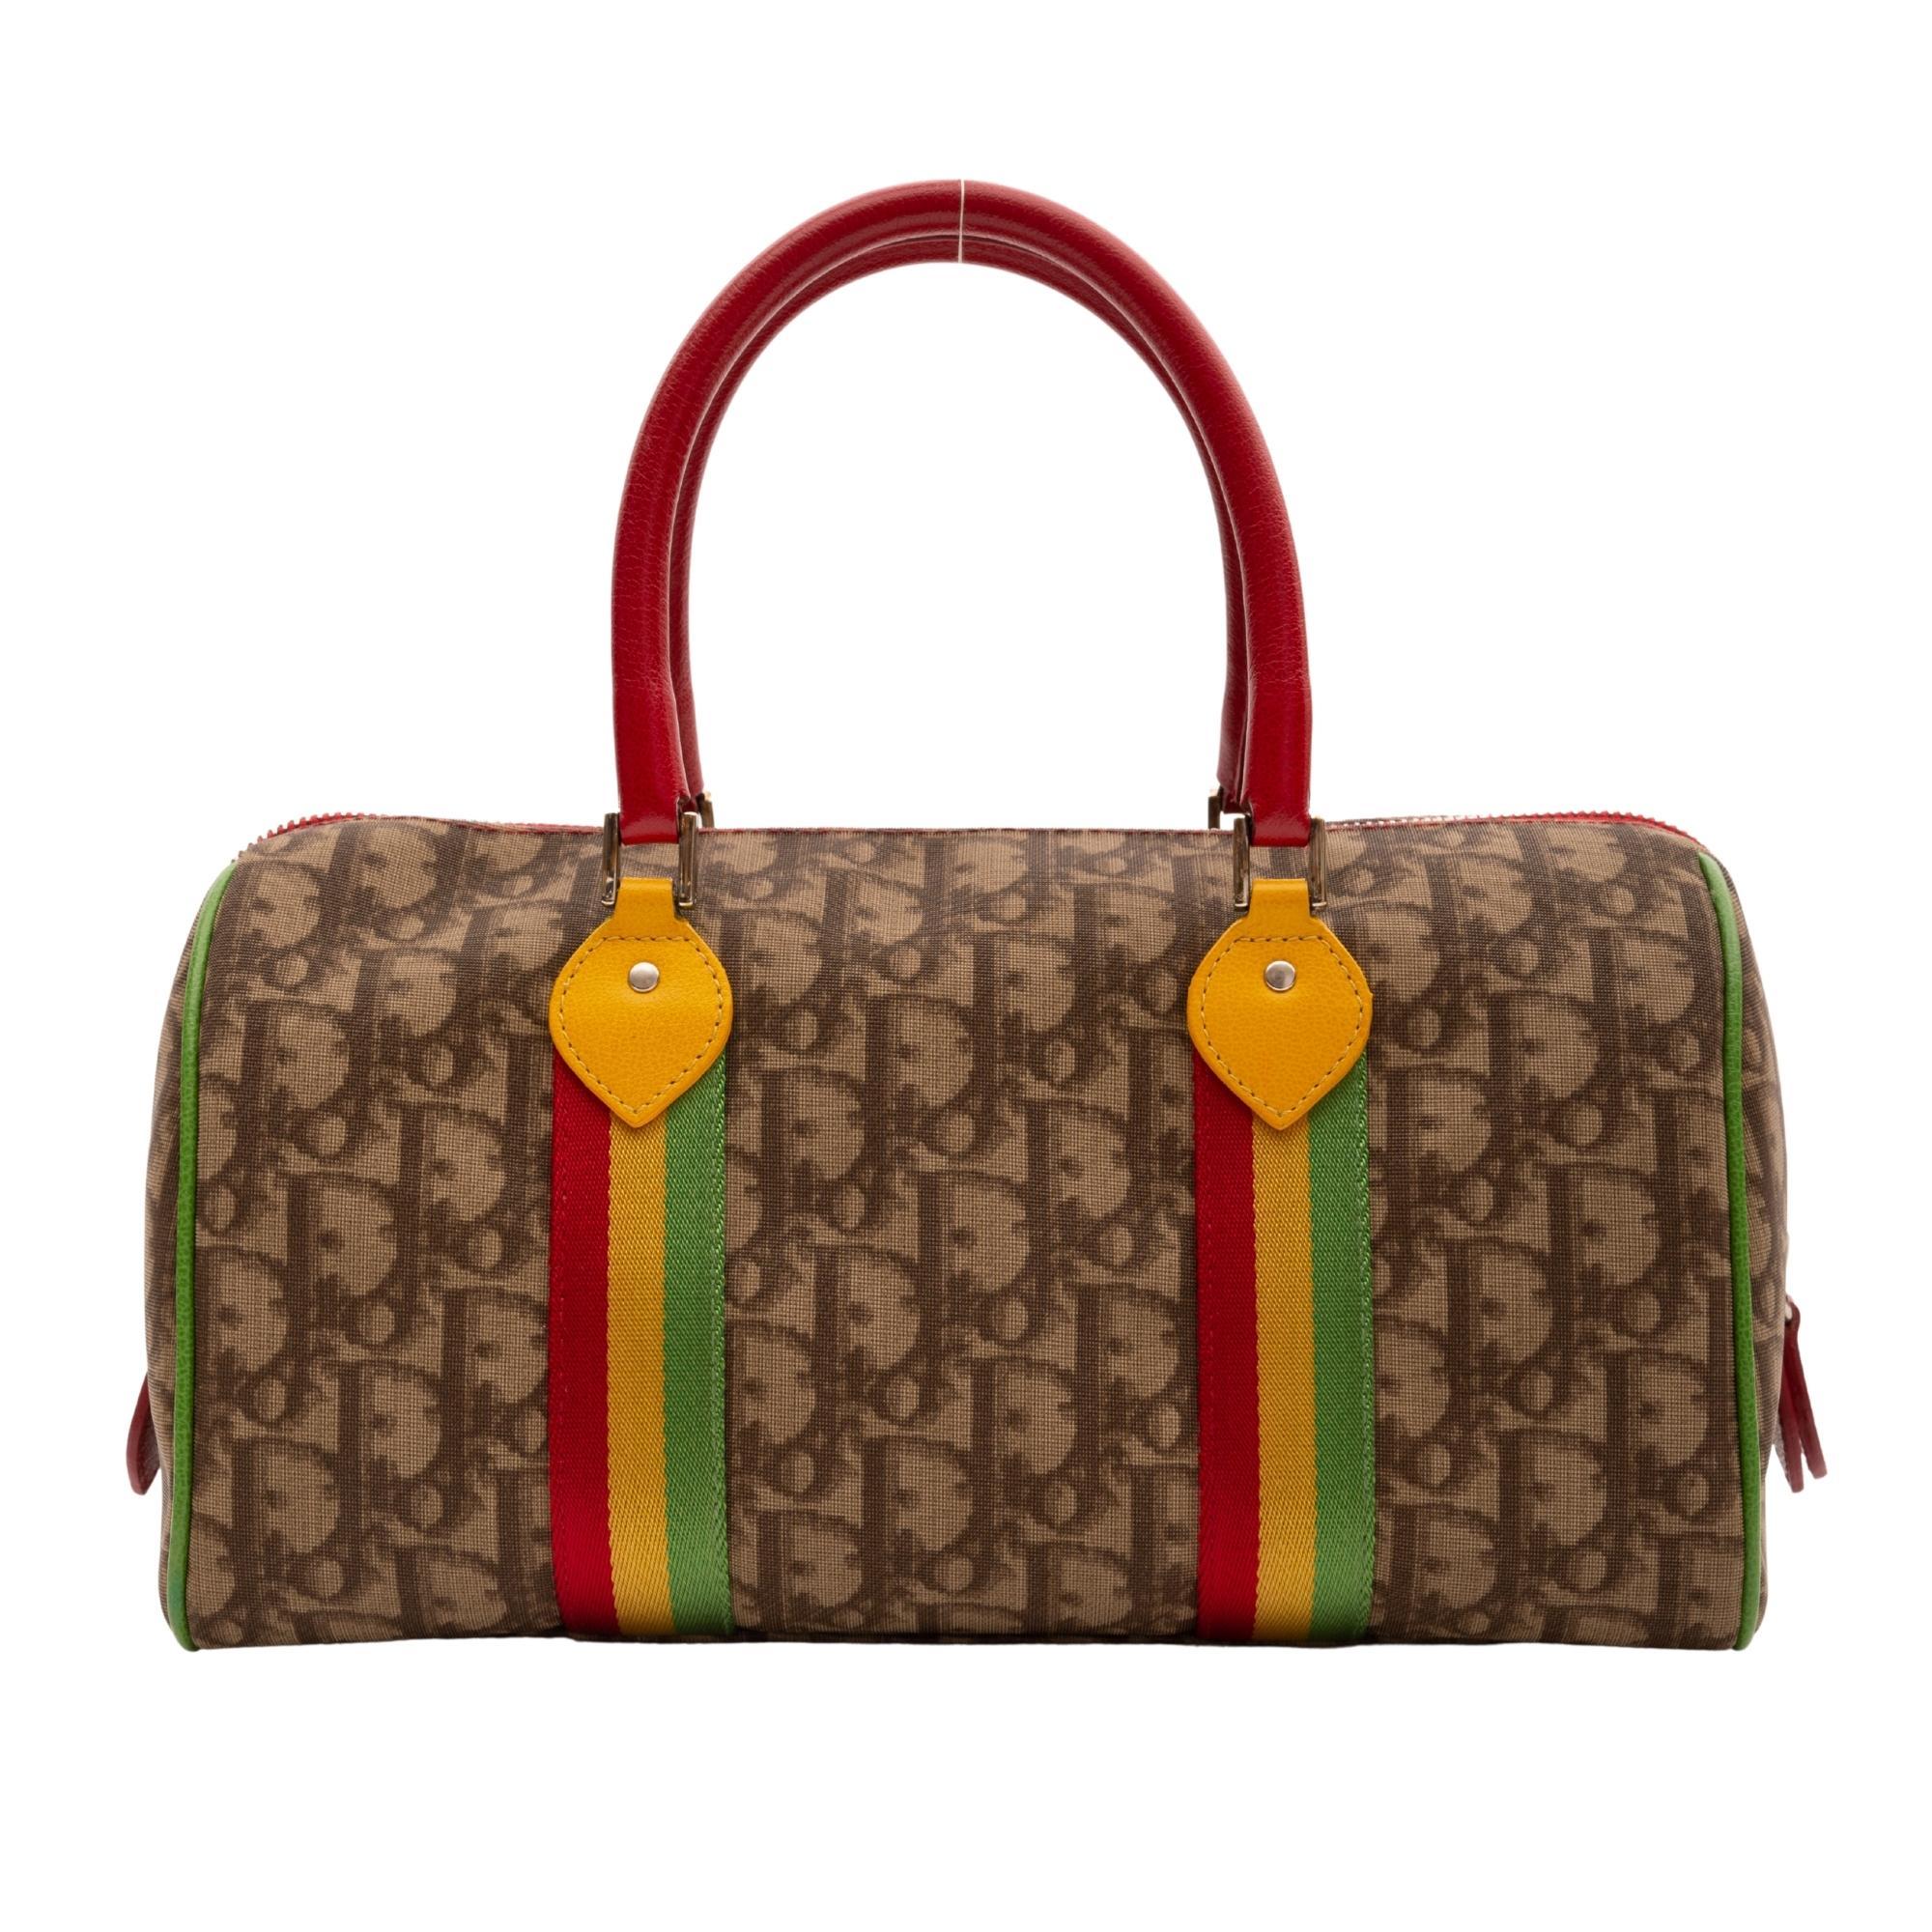 Christian Dior Boston bag from the early 2000's Rasta collection made of coated canvas with Dior’s signature monogram trotter print. The bag features Rasta inspired colors on leather details including dual rolled leather top handles in red, front